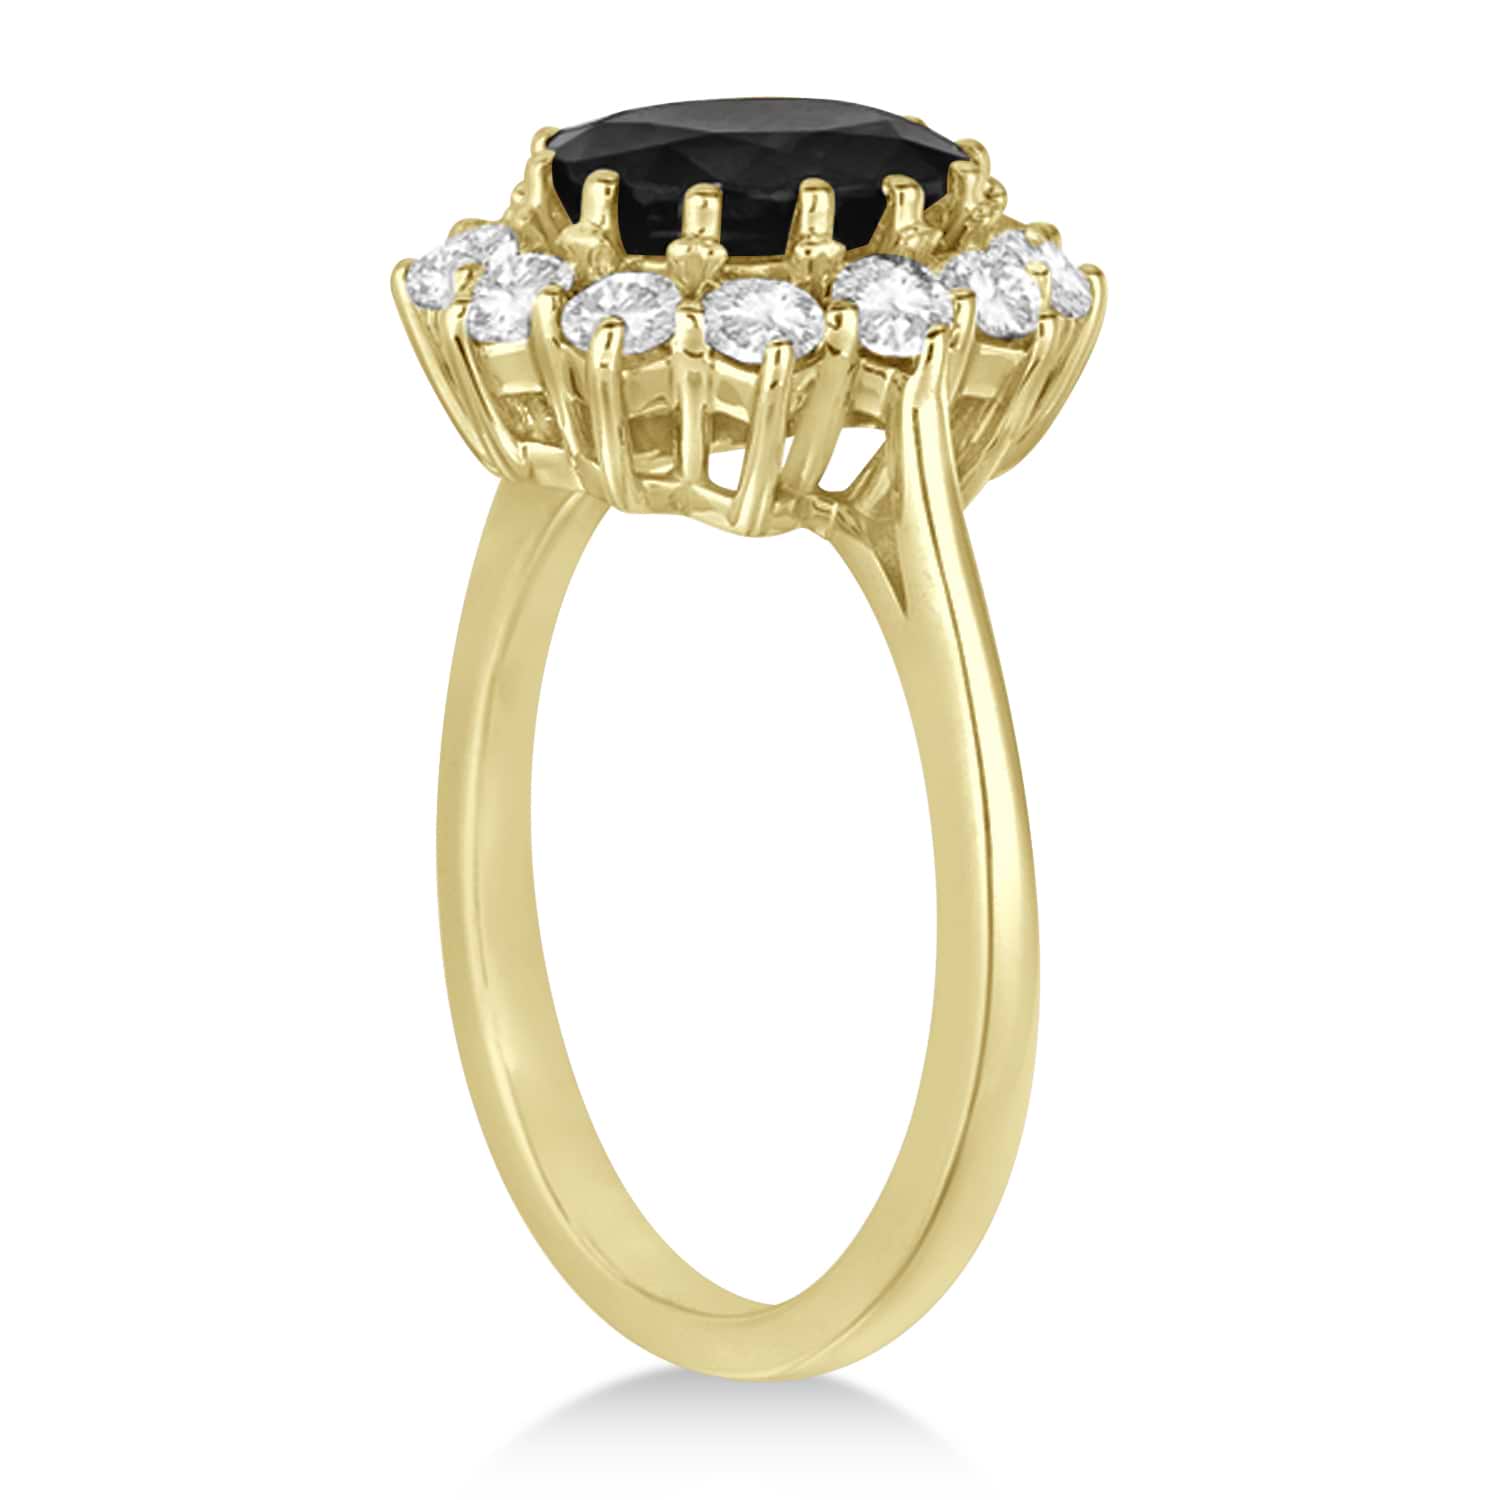 Oval Onyx and Diamond Ring 18k Yellow Gold (3.60ctw)